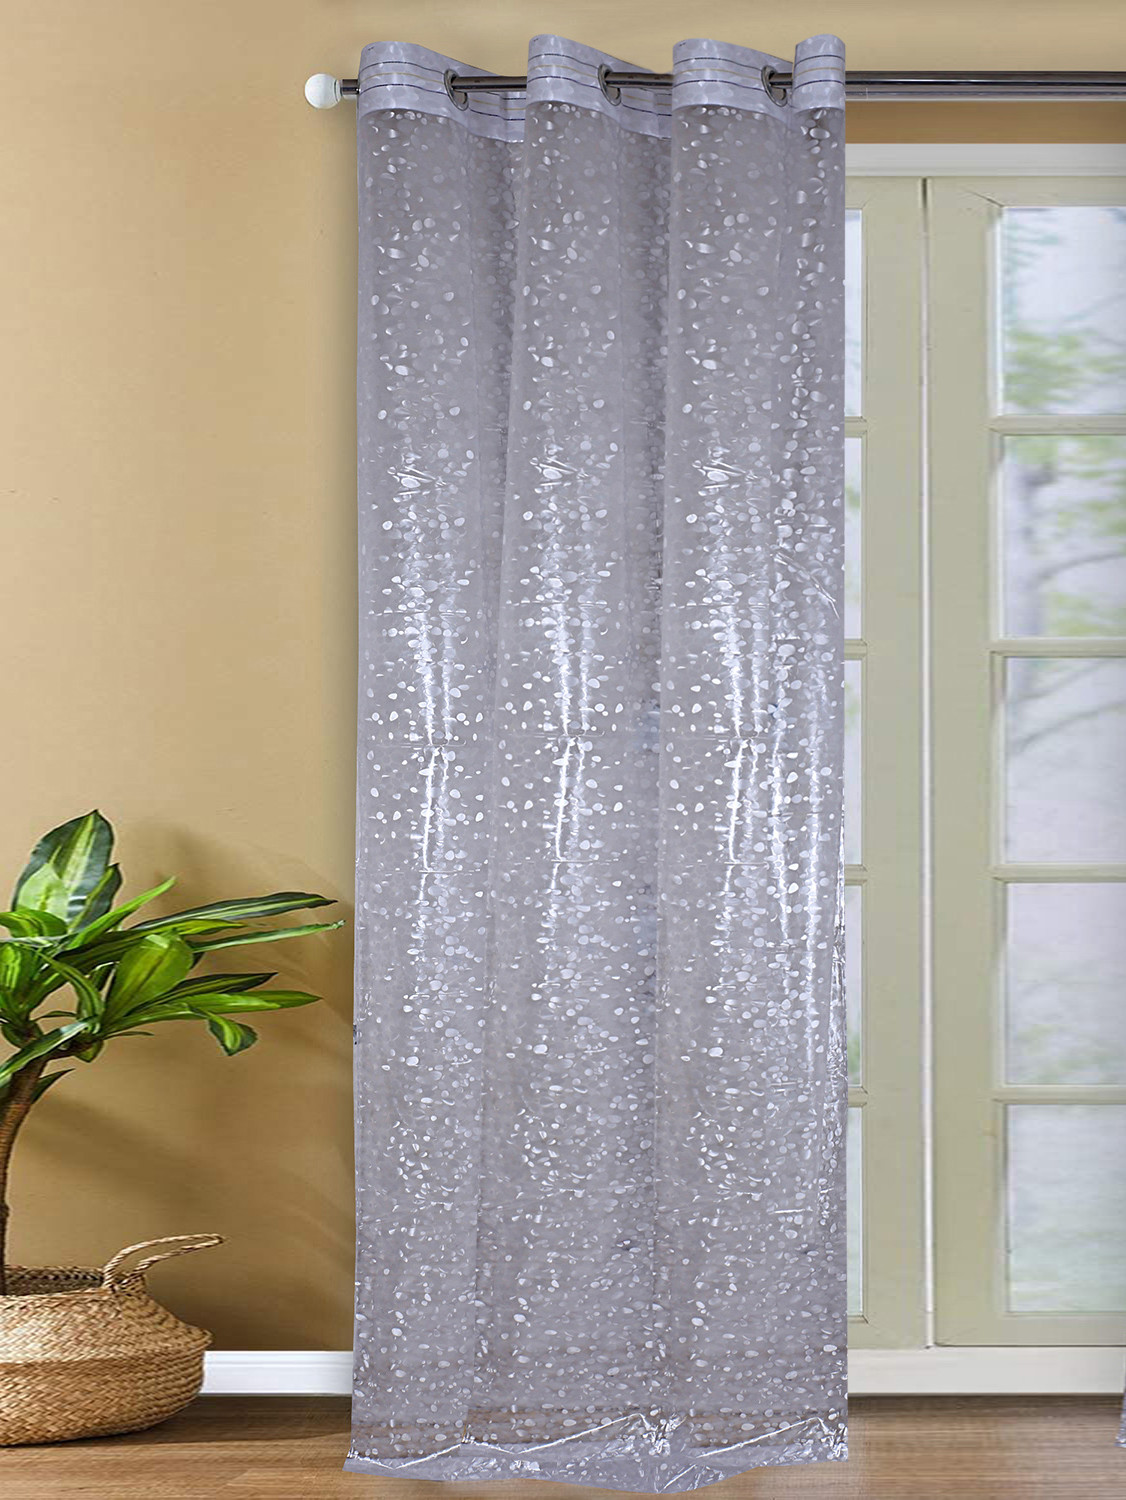 Kuber Industries Stone Print Stain-Resistant & Waterproof PVC AC Curtain For Home, office, restaurant 9 Feet With 6 Grommets (Transparent)